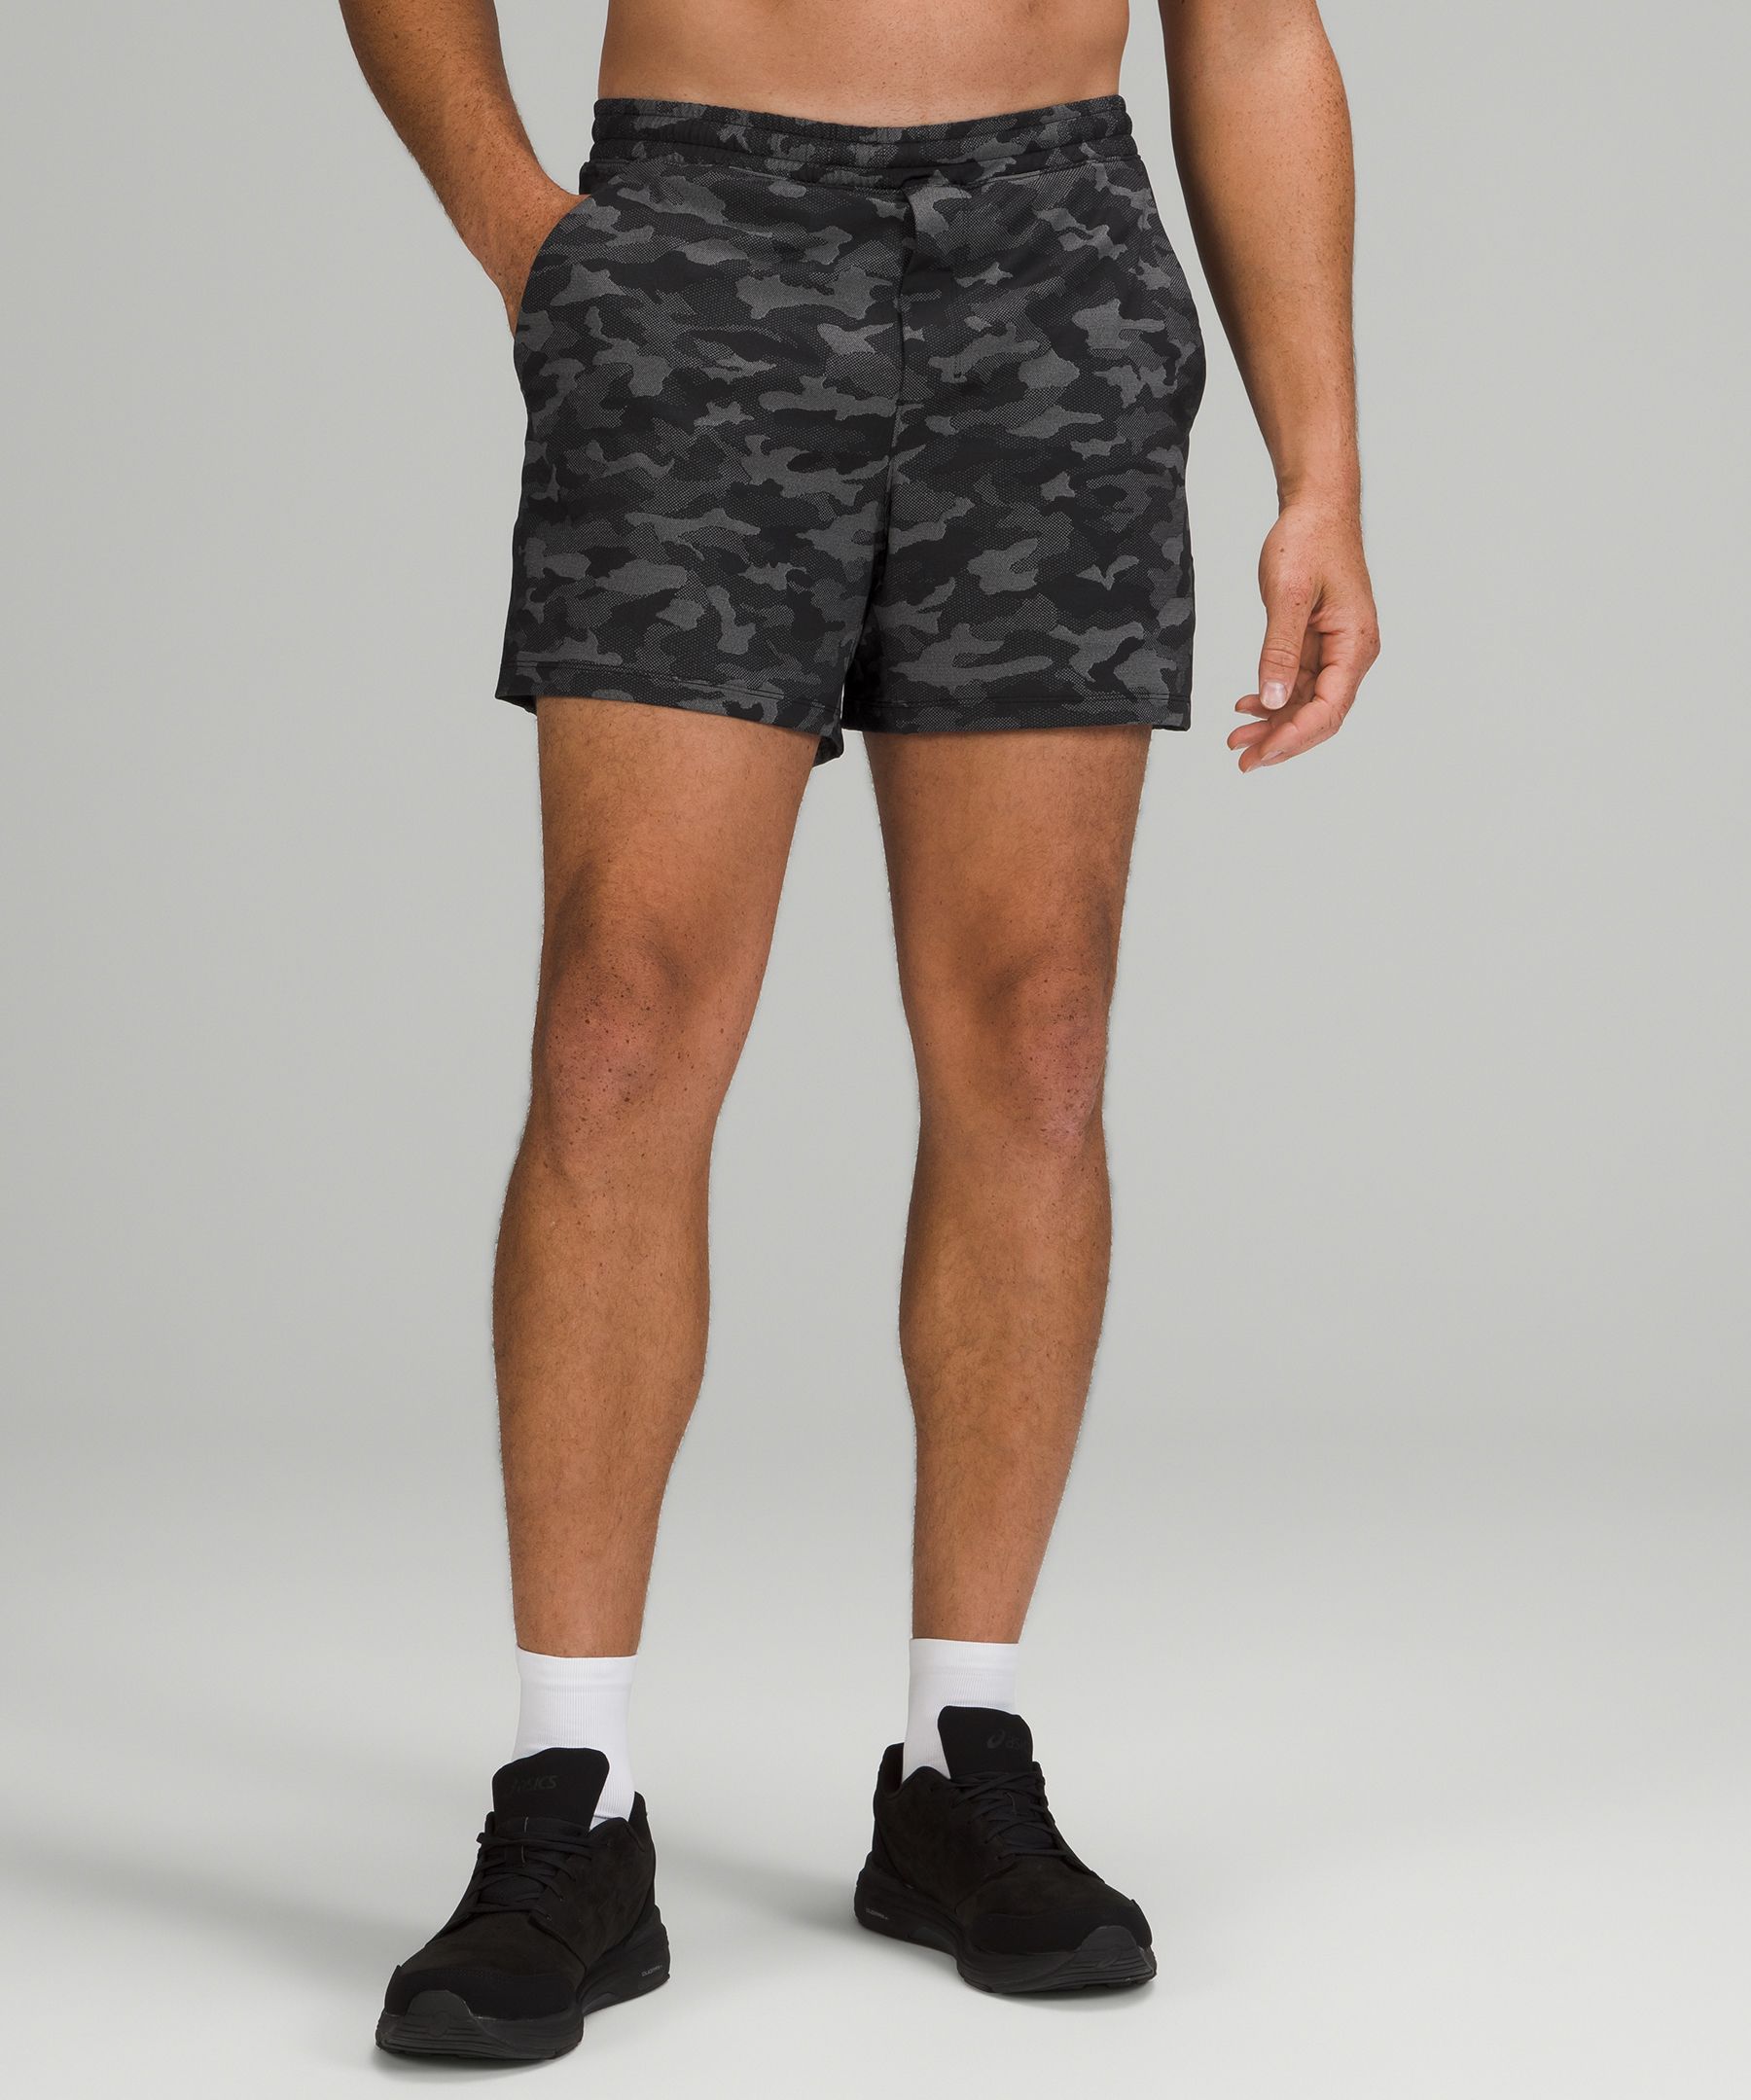 Lululemon Pace Breaker Short 5 - Lined – The Shop at Equinox